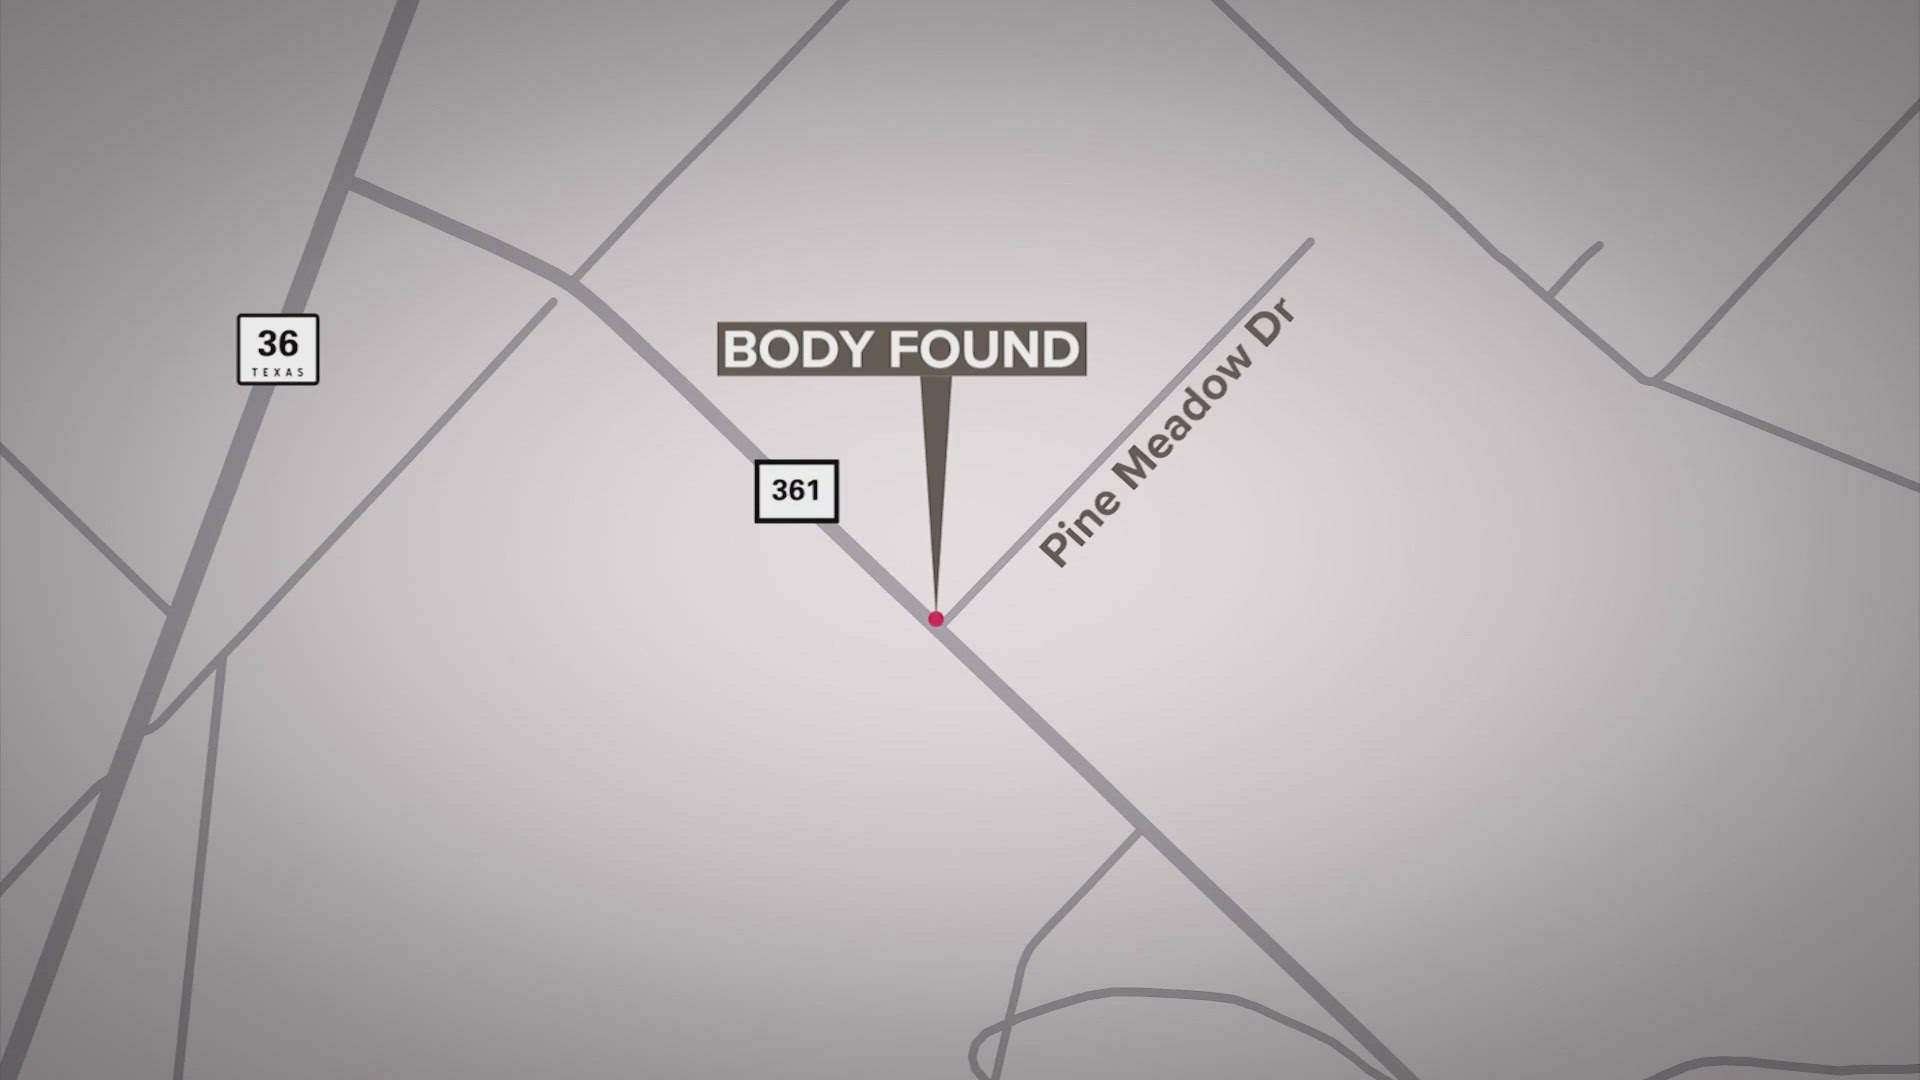 The workers found the body in a drainage ditch along FM 361 just off Highway 36. Investigators believe it could be a hit-and-run incident.